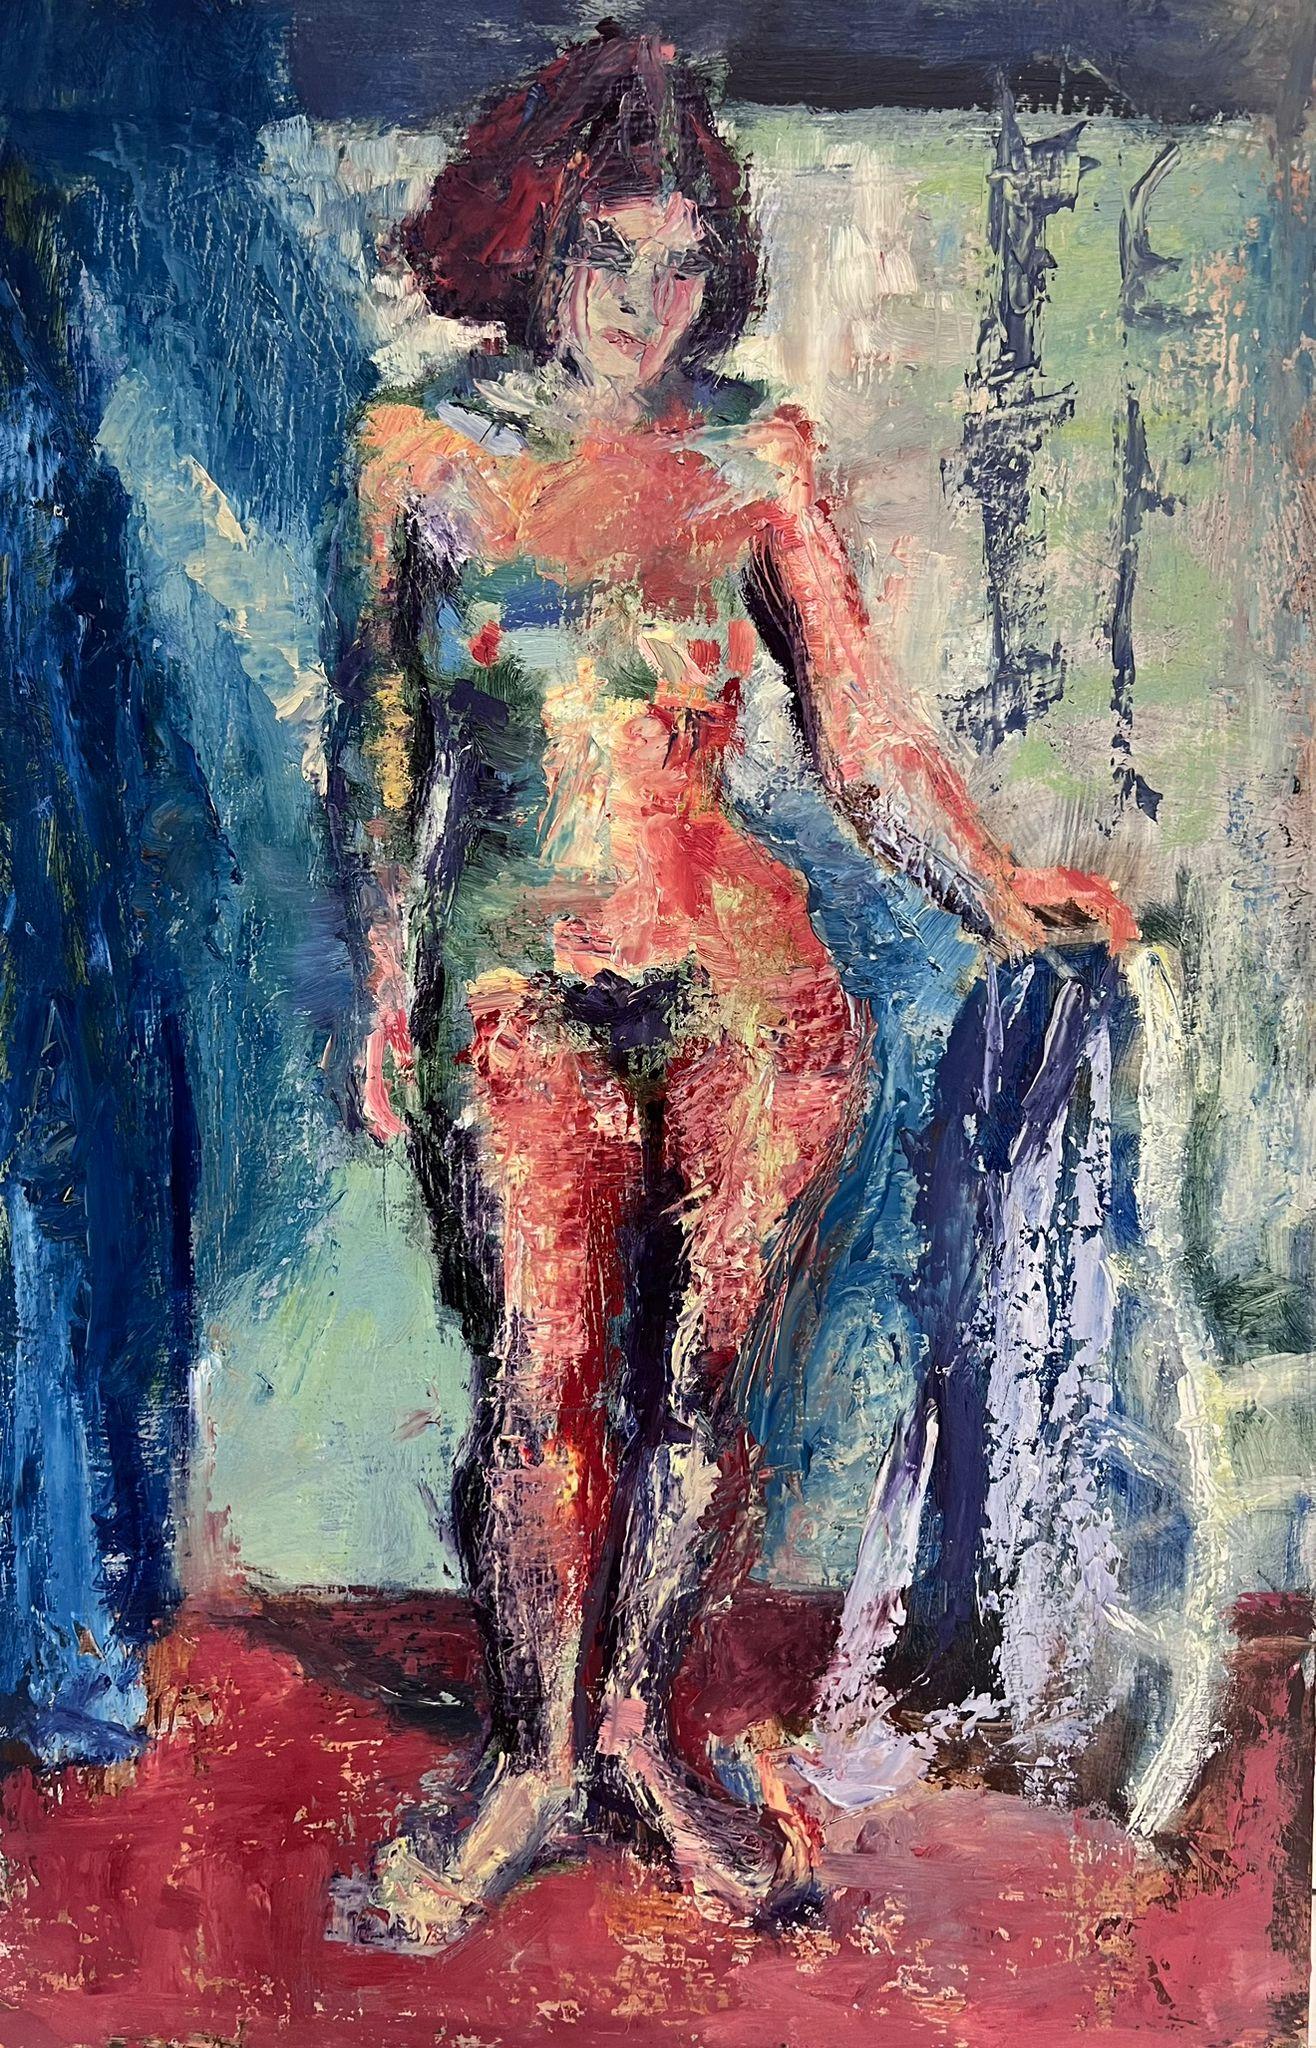 Posed Nude Model
by Helen Greenfield (British 20th century)
oil painting on board, un framed
board: 20 x 13 inches
condition: overall very good
provenance: all the paintings we have by this artist have come from their studio sale in England

Helen